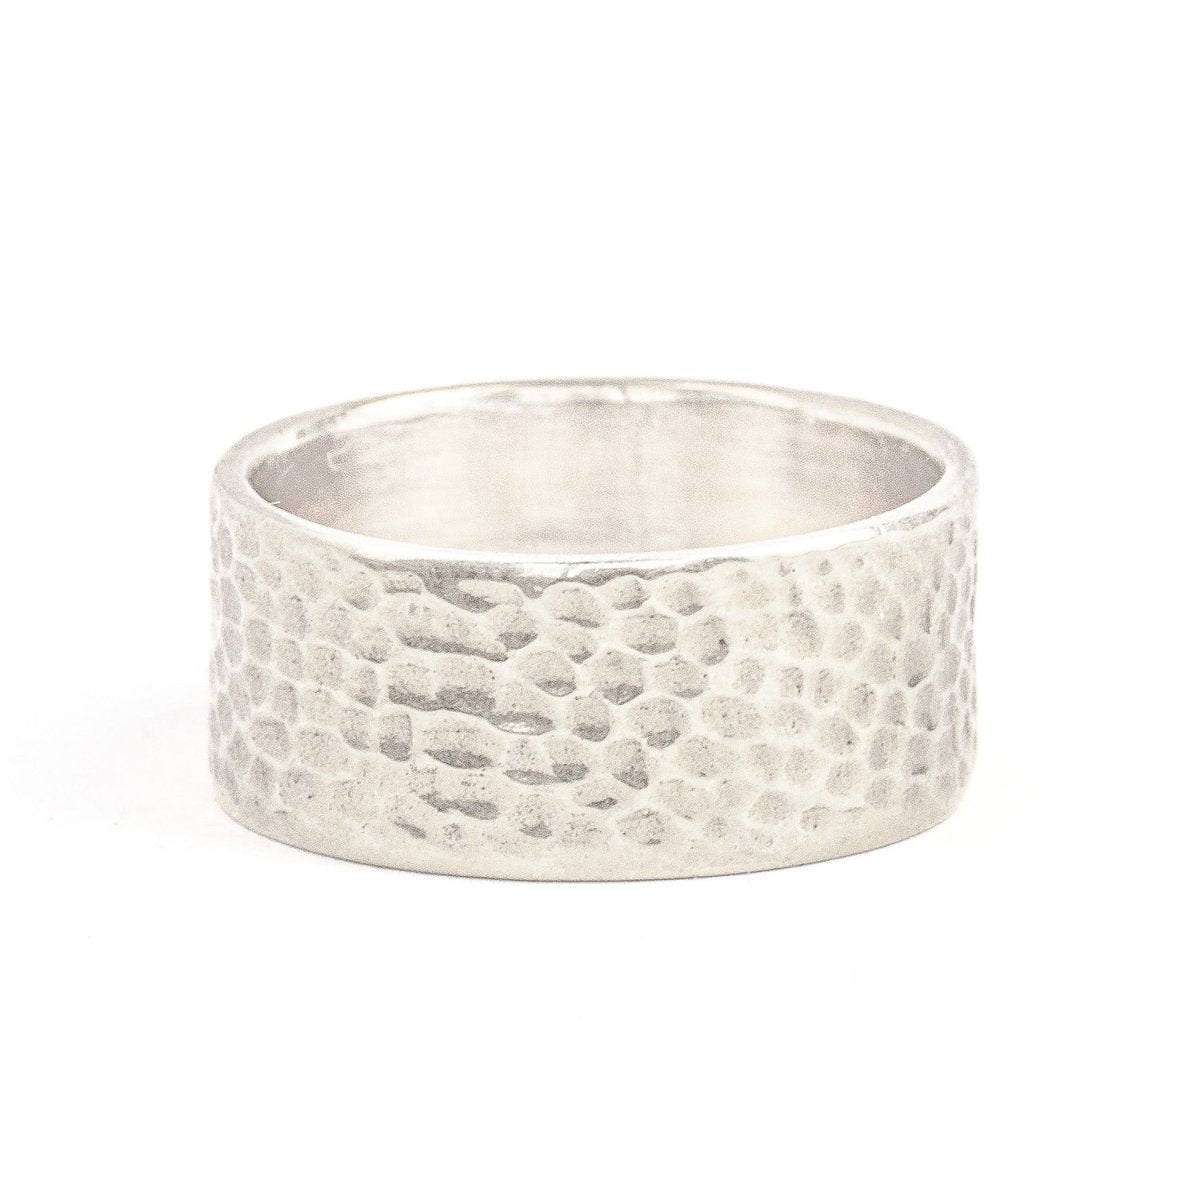 Hammered Wide Sterling Silver Band